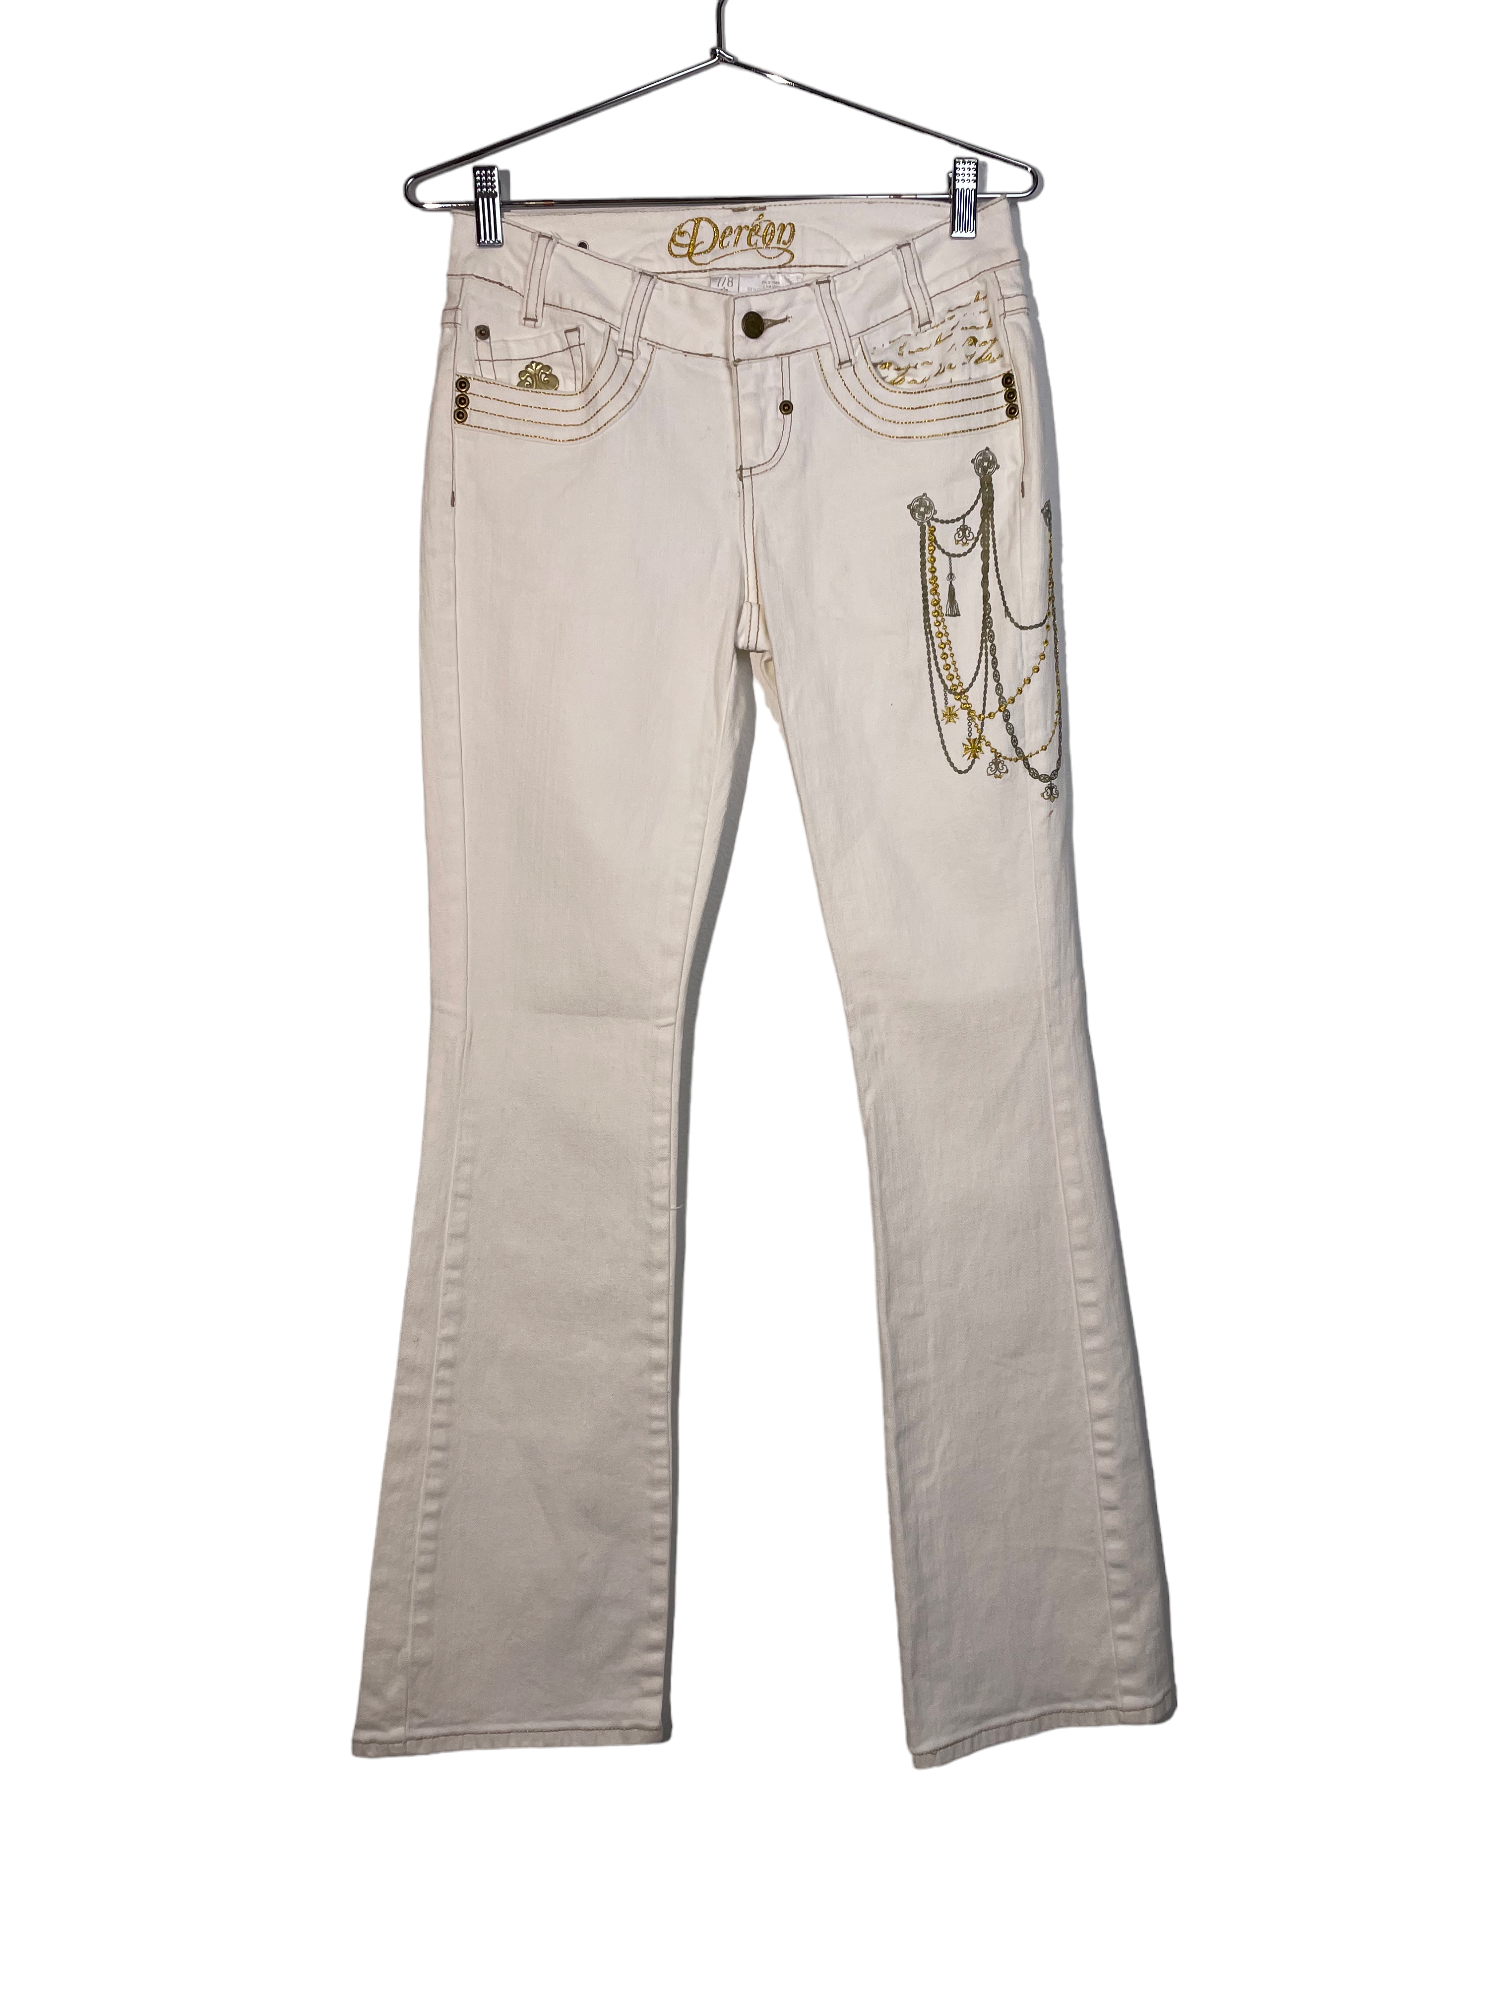 House Of Dereon White Jeans